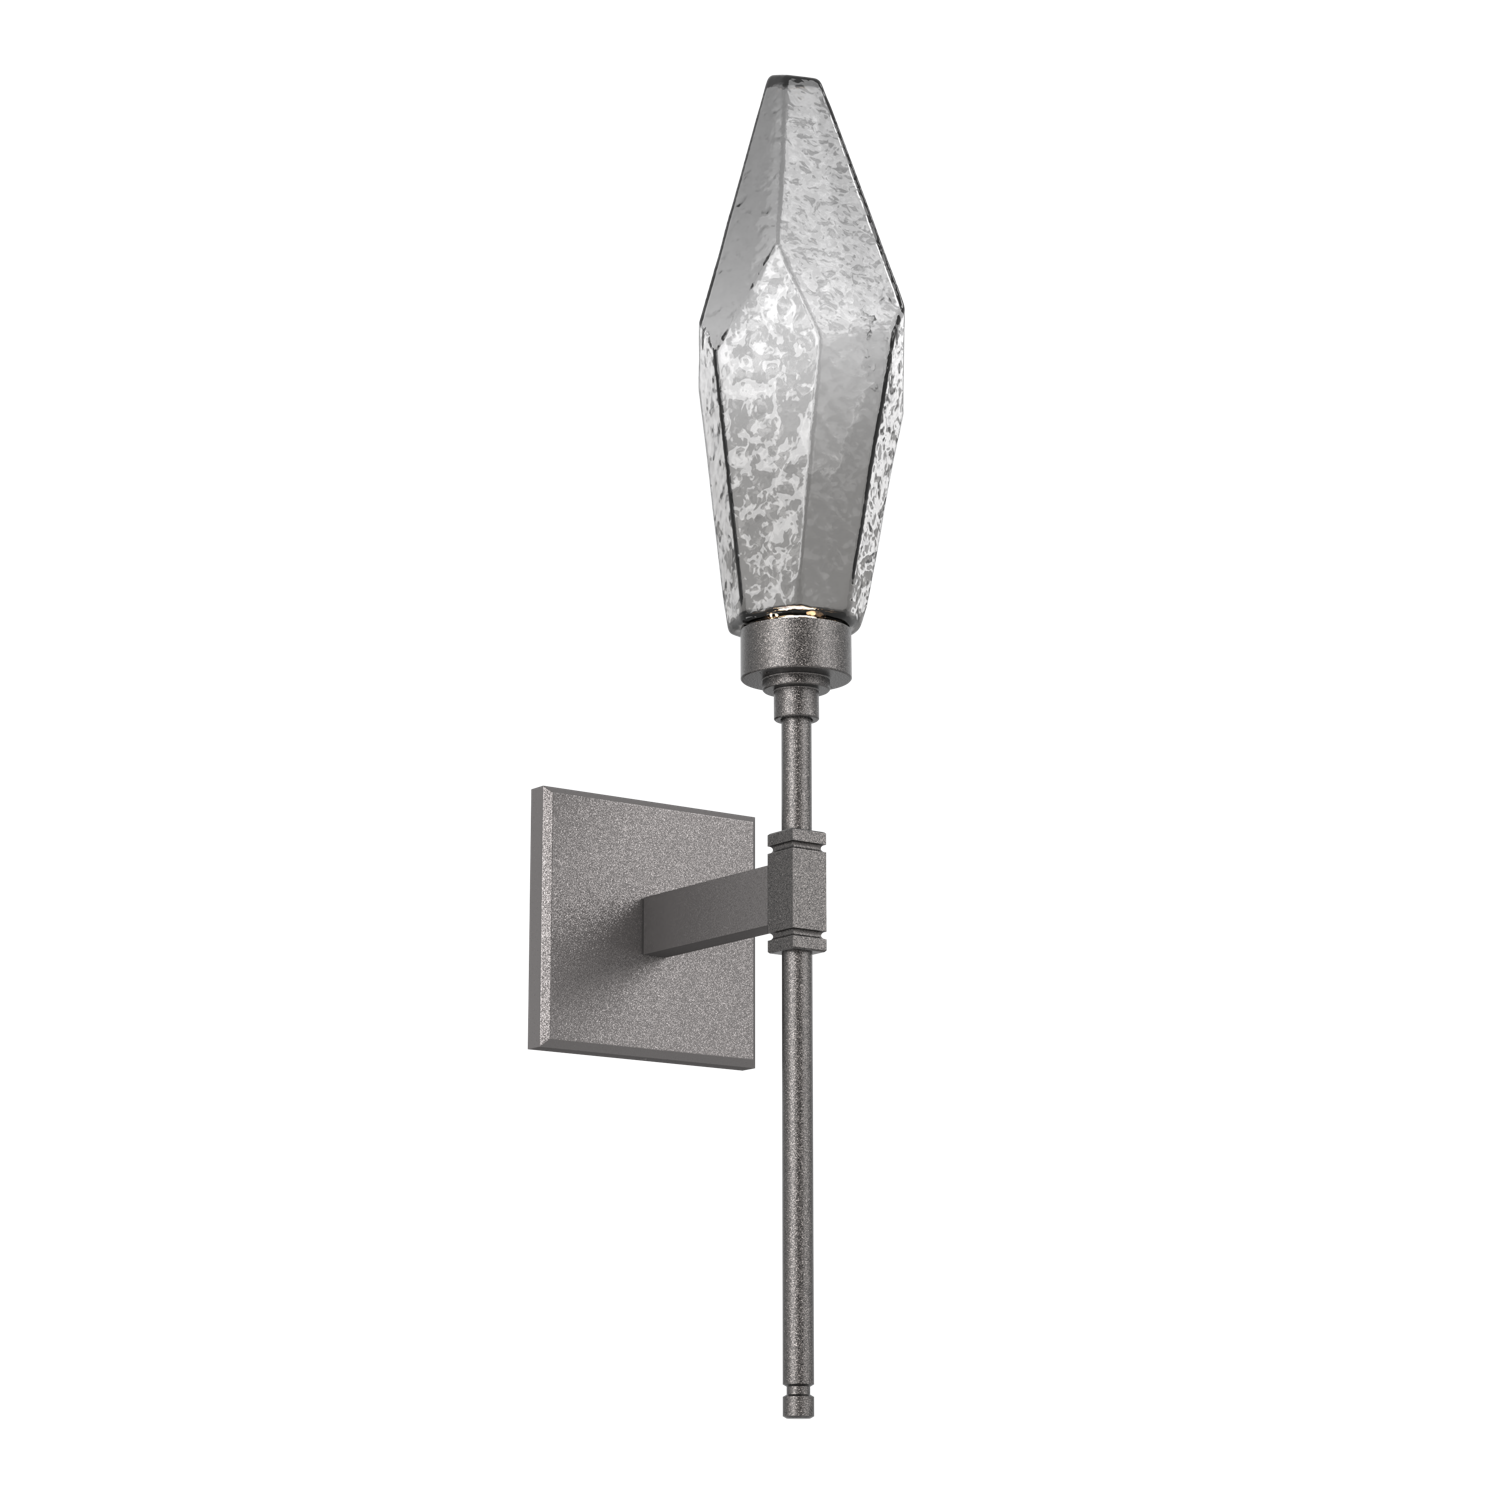 IDB0050-07-GP-CS-Hammerton-Studio-Rock-Crystal-belvedere-wall-sconce-with-graphite-finish-and-chilled-smoke-glass-shades-and-LED-lamping